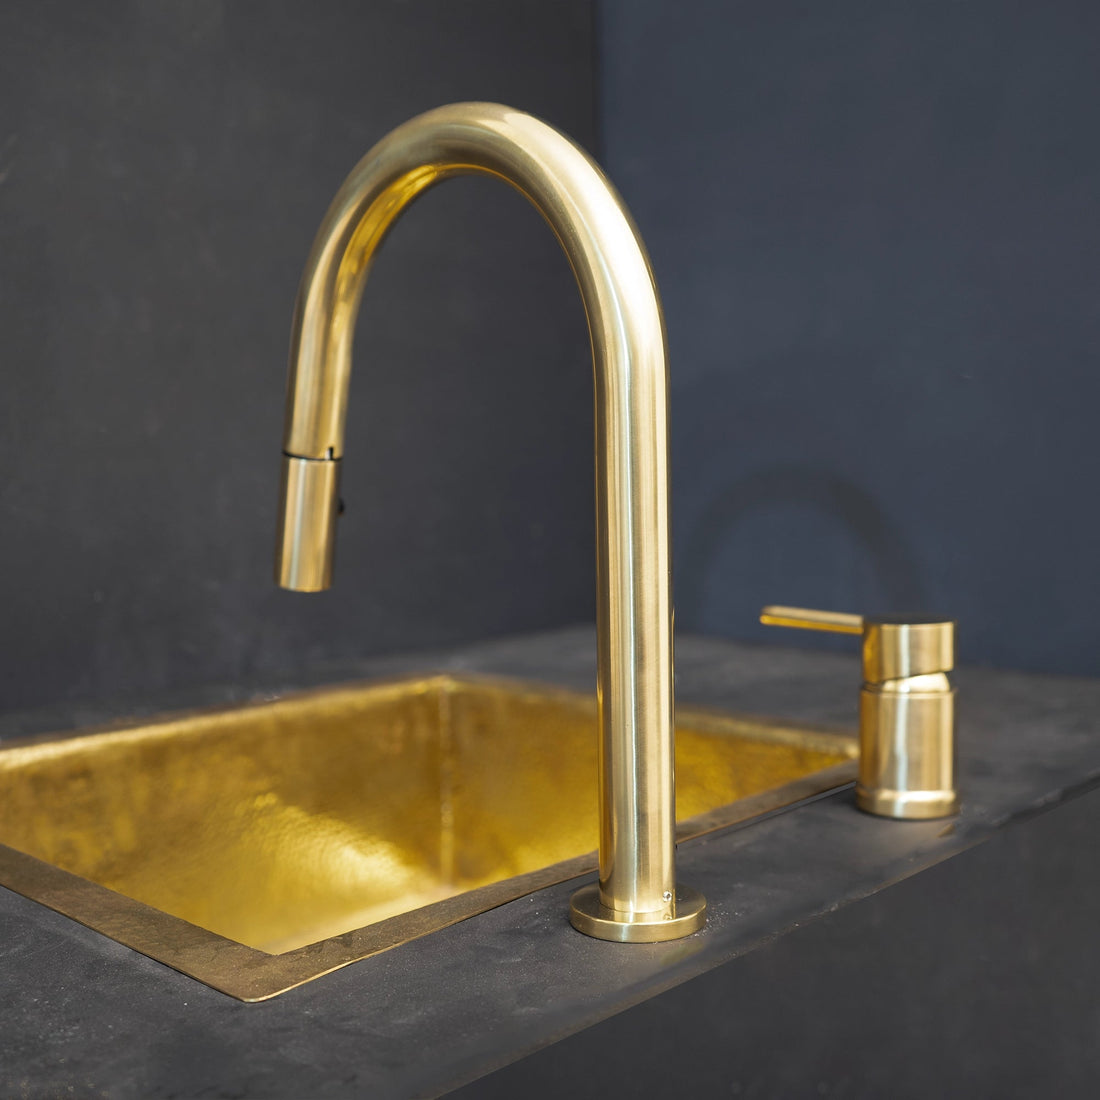 Deck Mounted Unlacquered Brass Single Handle Pull-Down Kitchen Faucet - Brassna